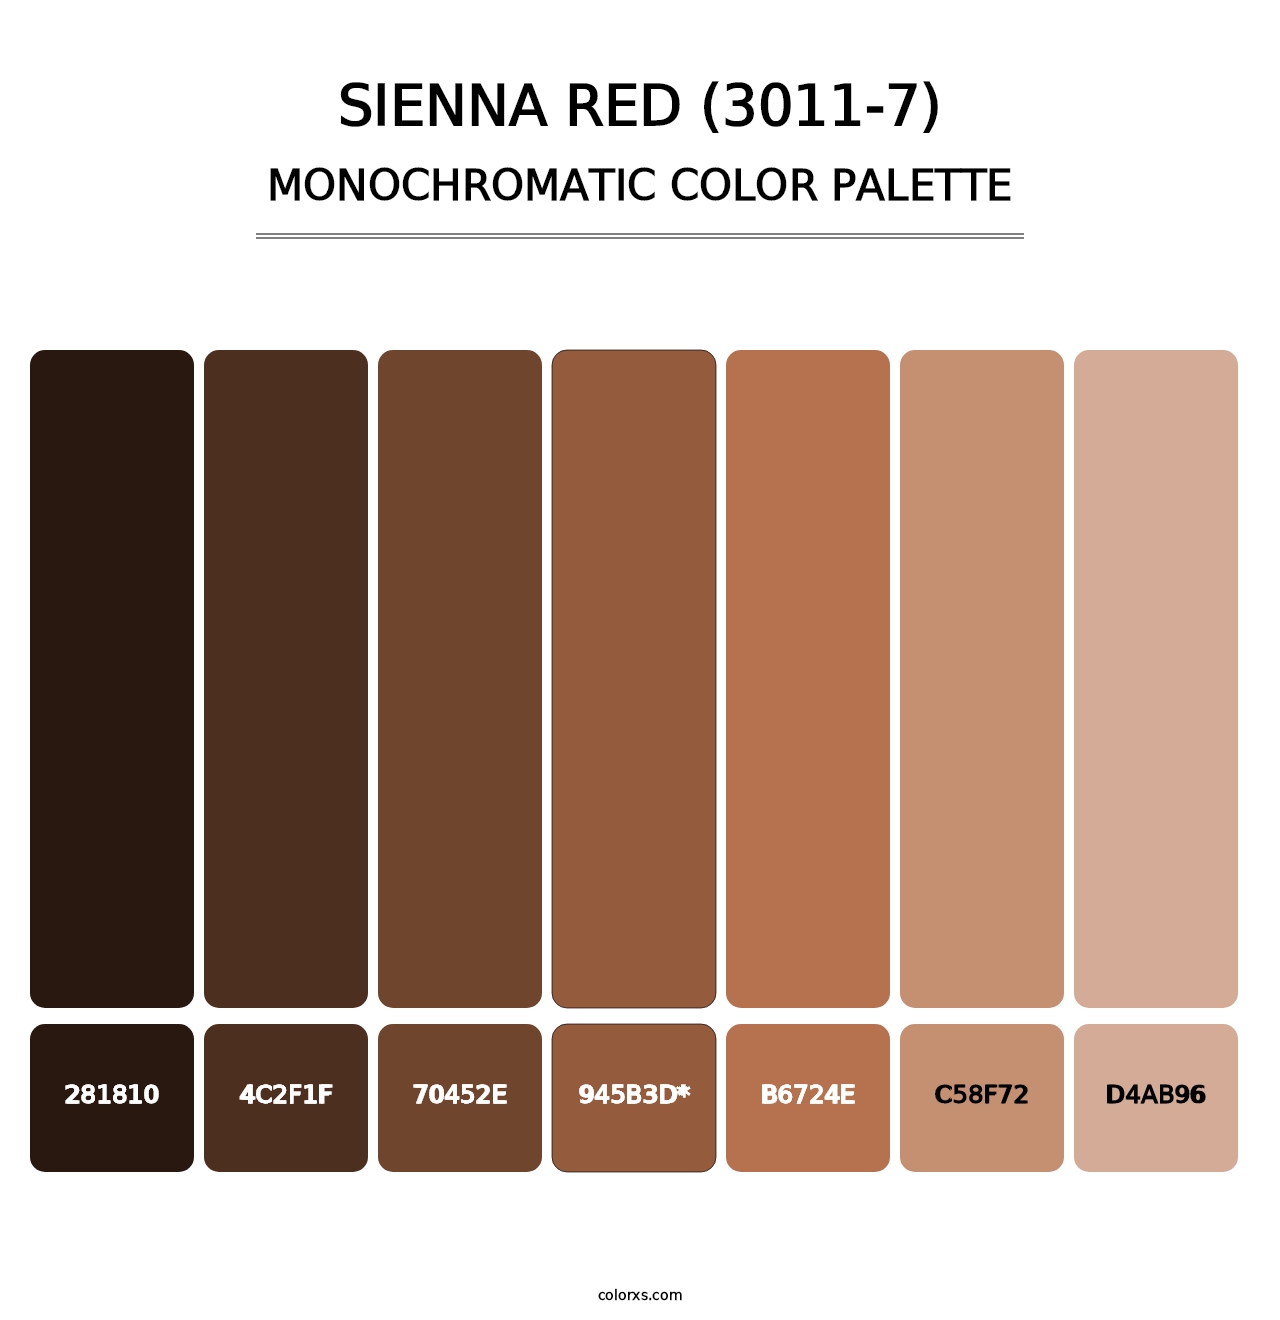 Sienna Red (3011-7) - Monochromatic Color Palette